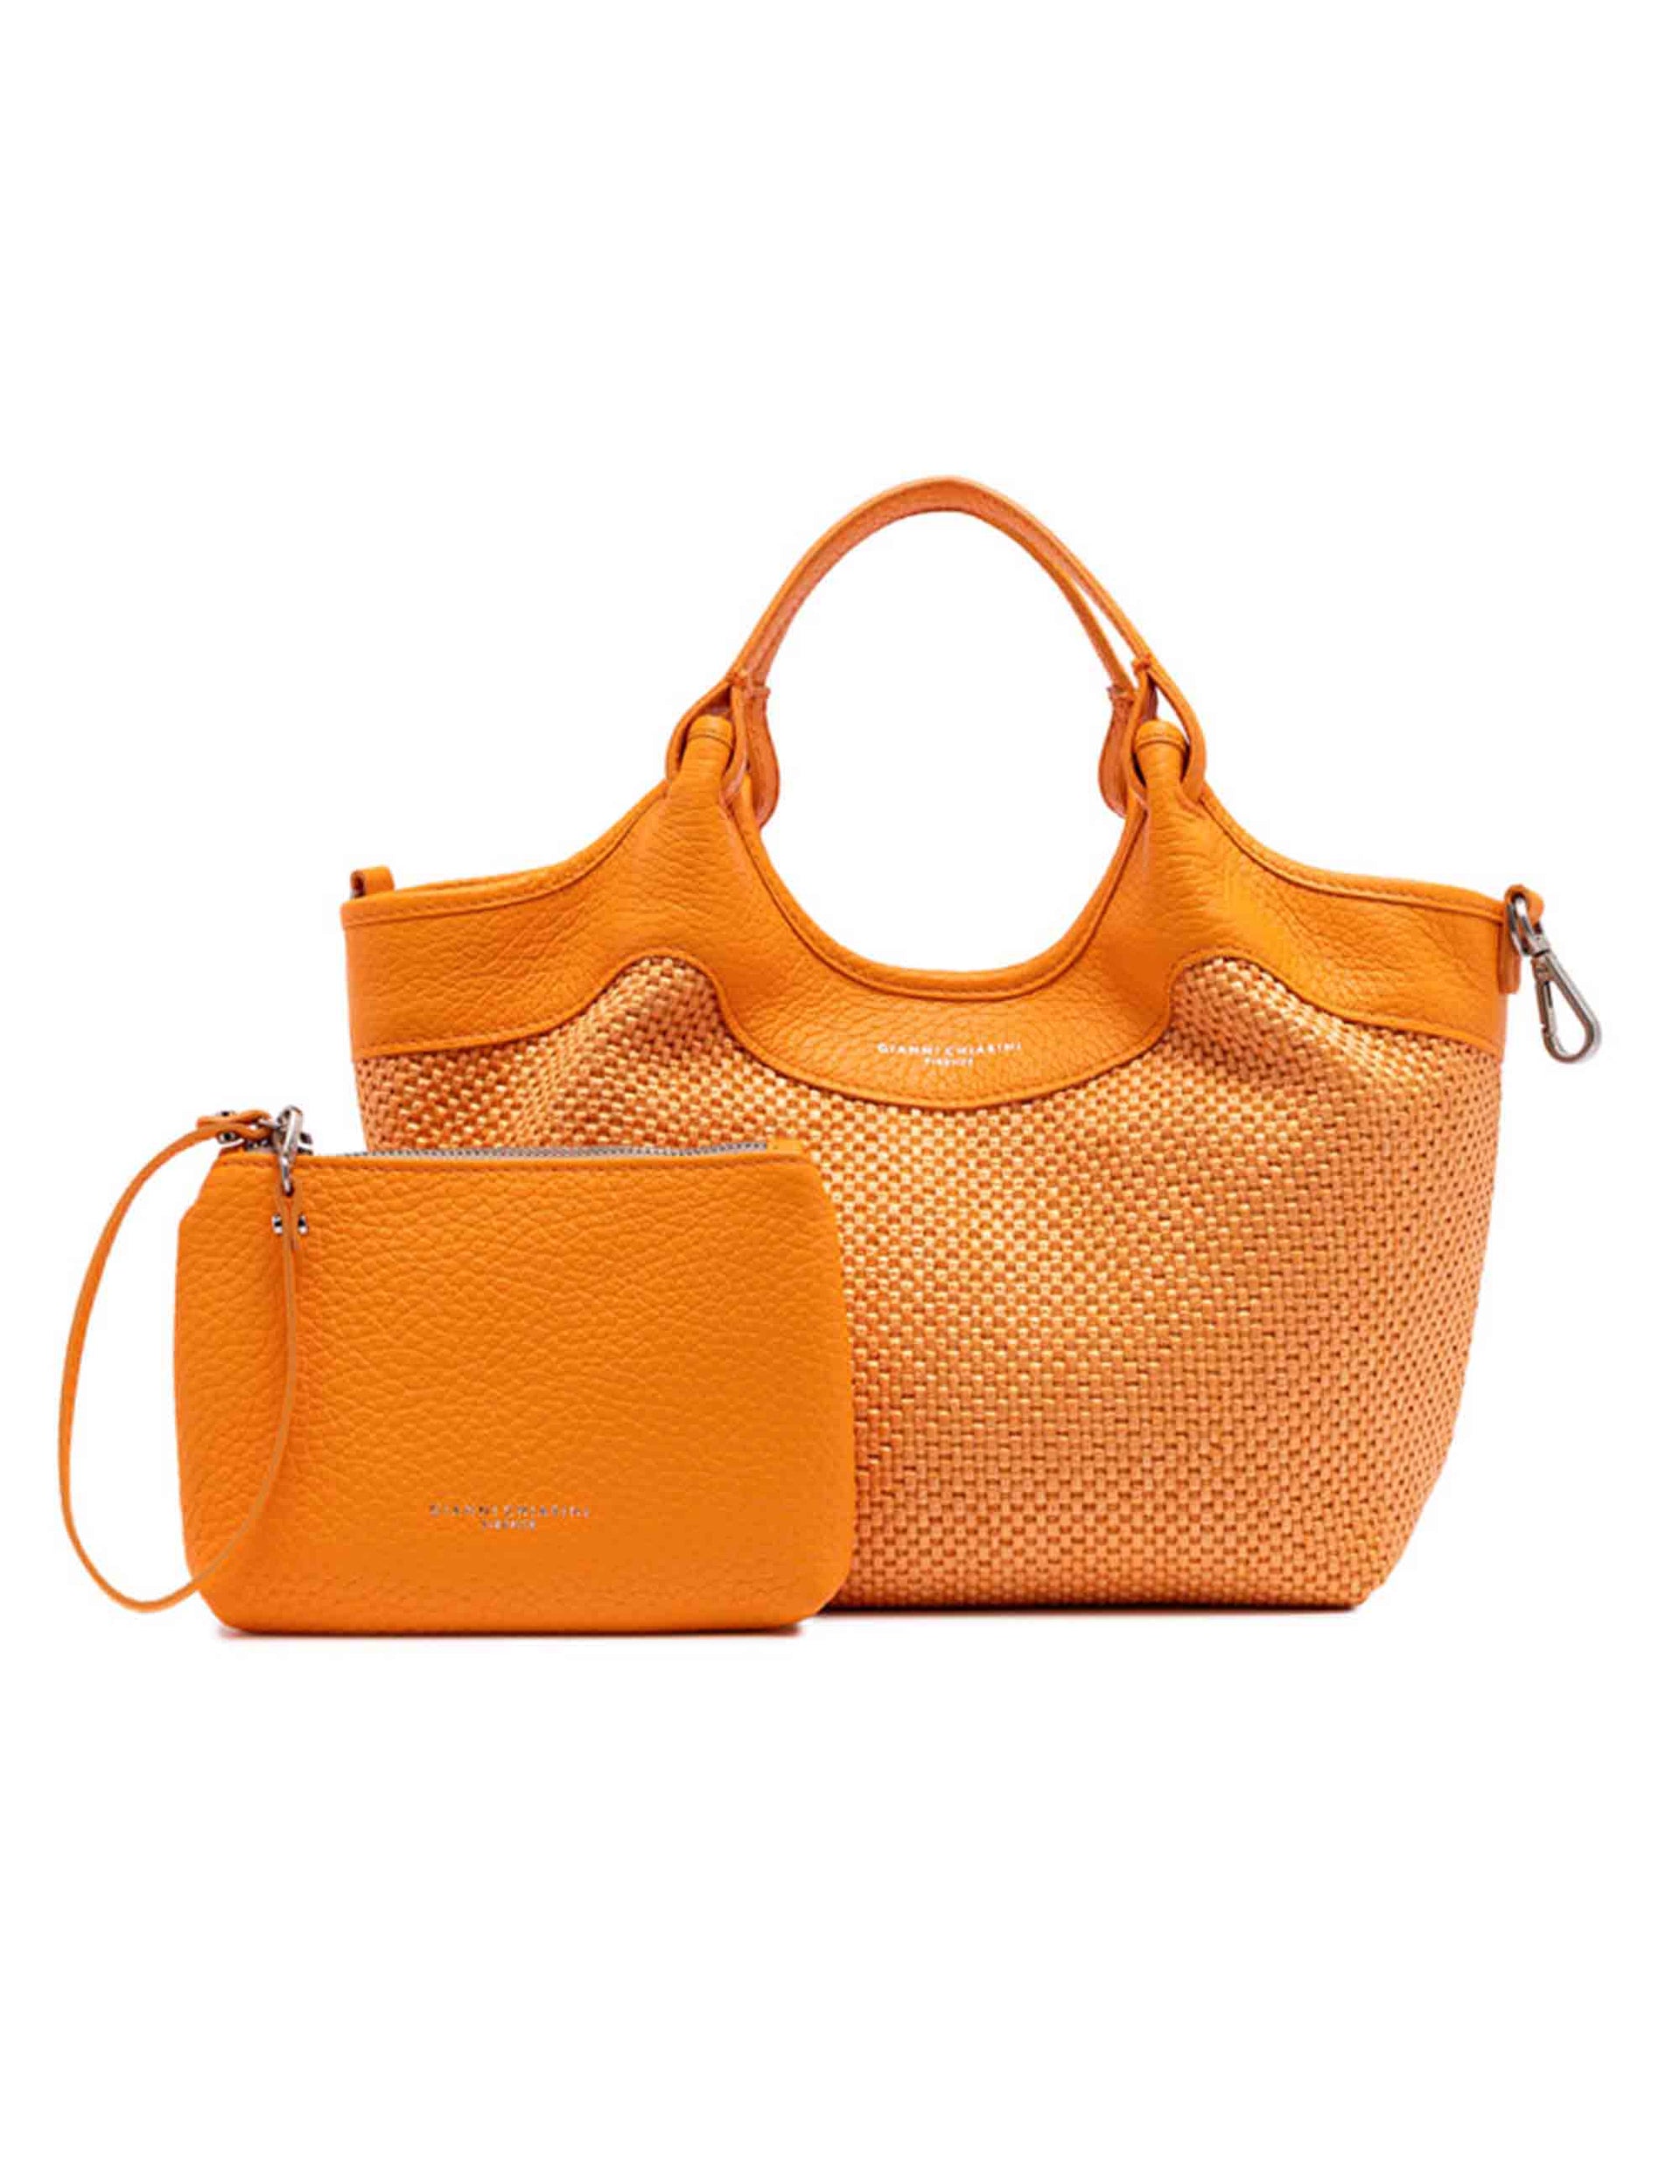 Dua women's shoulder bags in orange leather and fabric with mini clutch bag